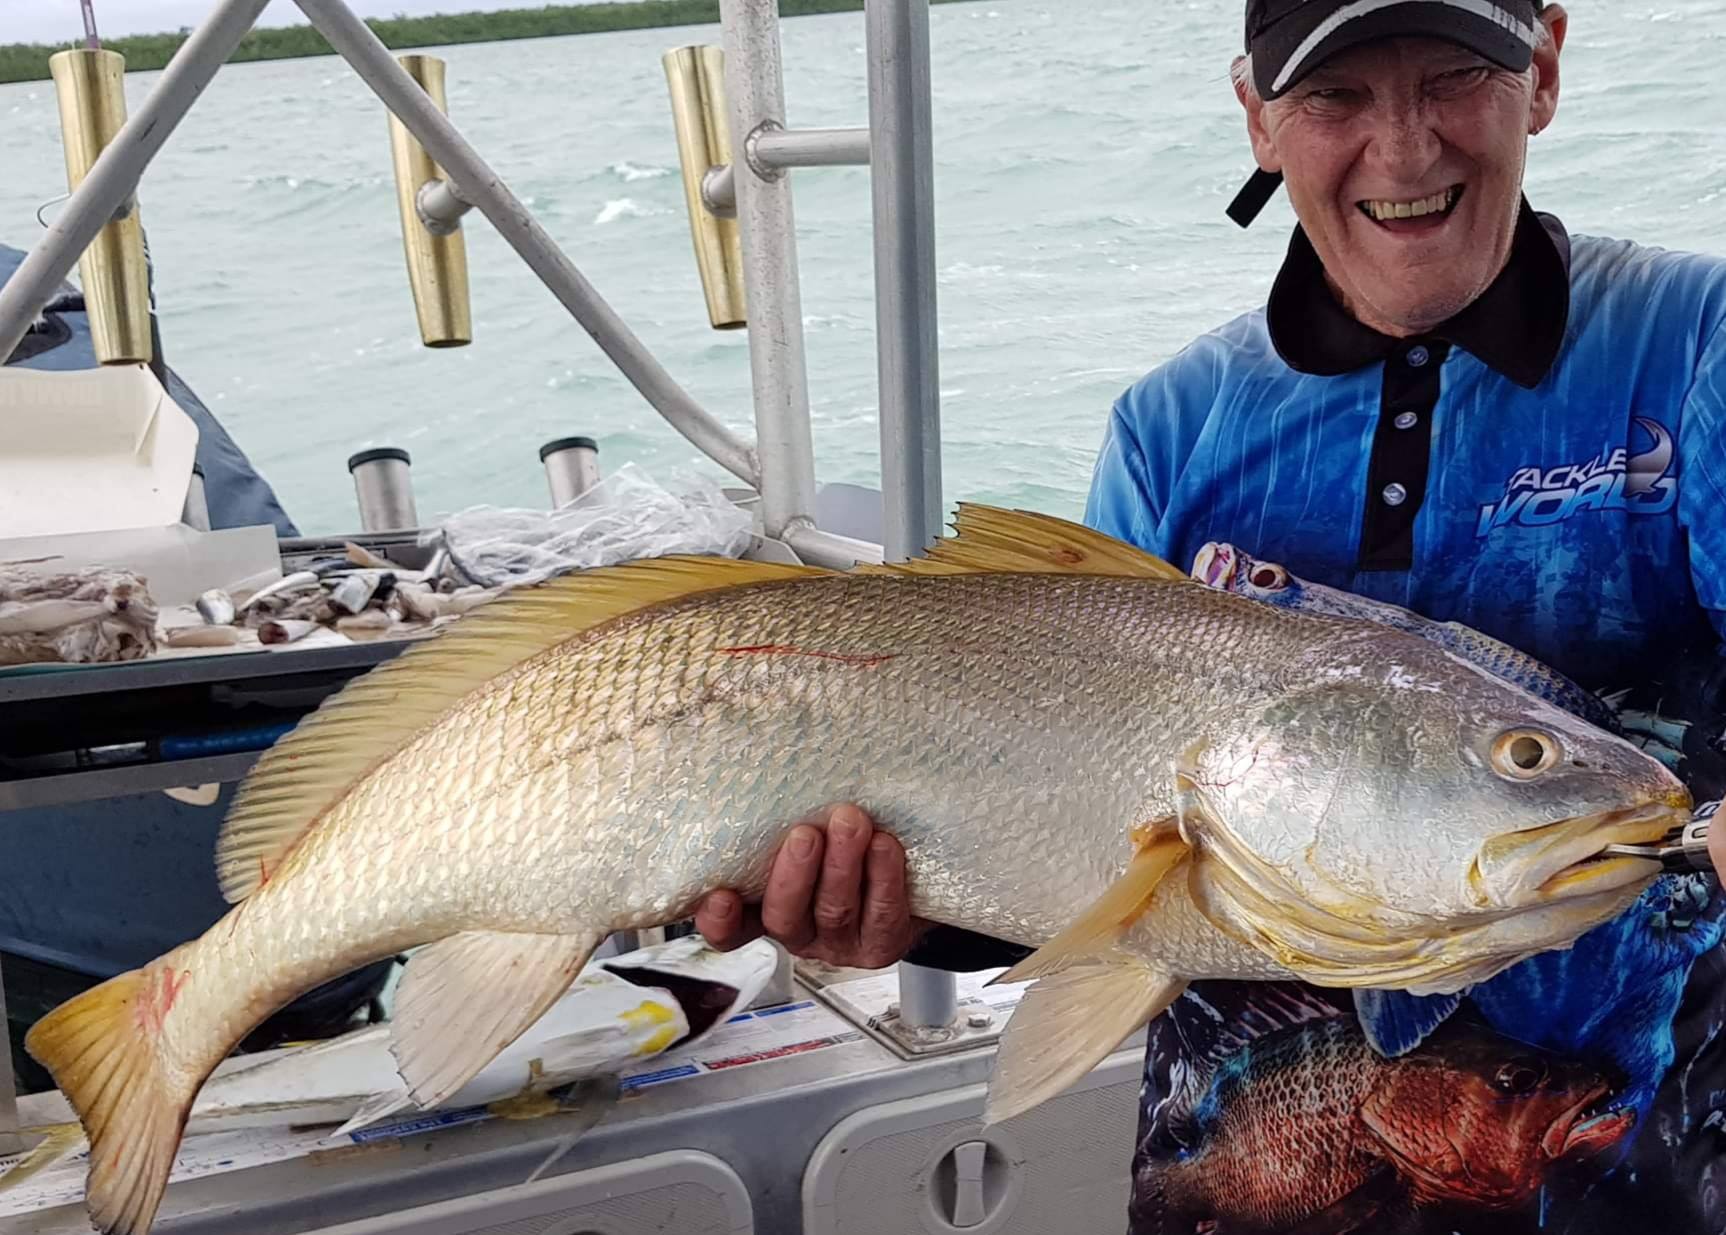 A very happy guest with a great Jewfish caught on an Offshore Boats reef fishing charter